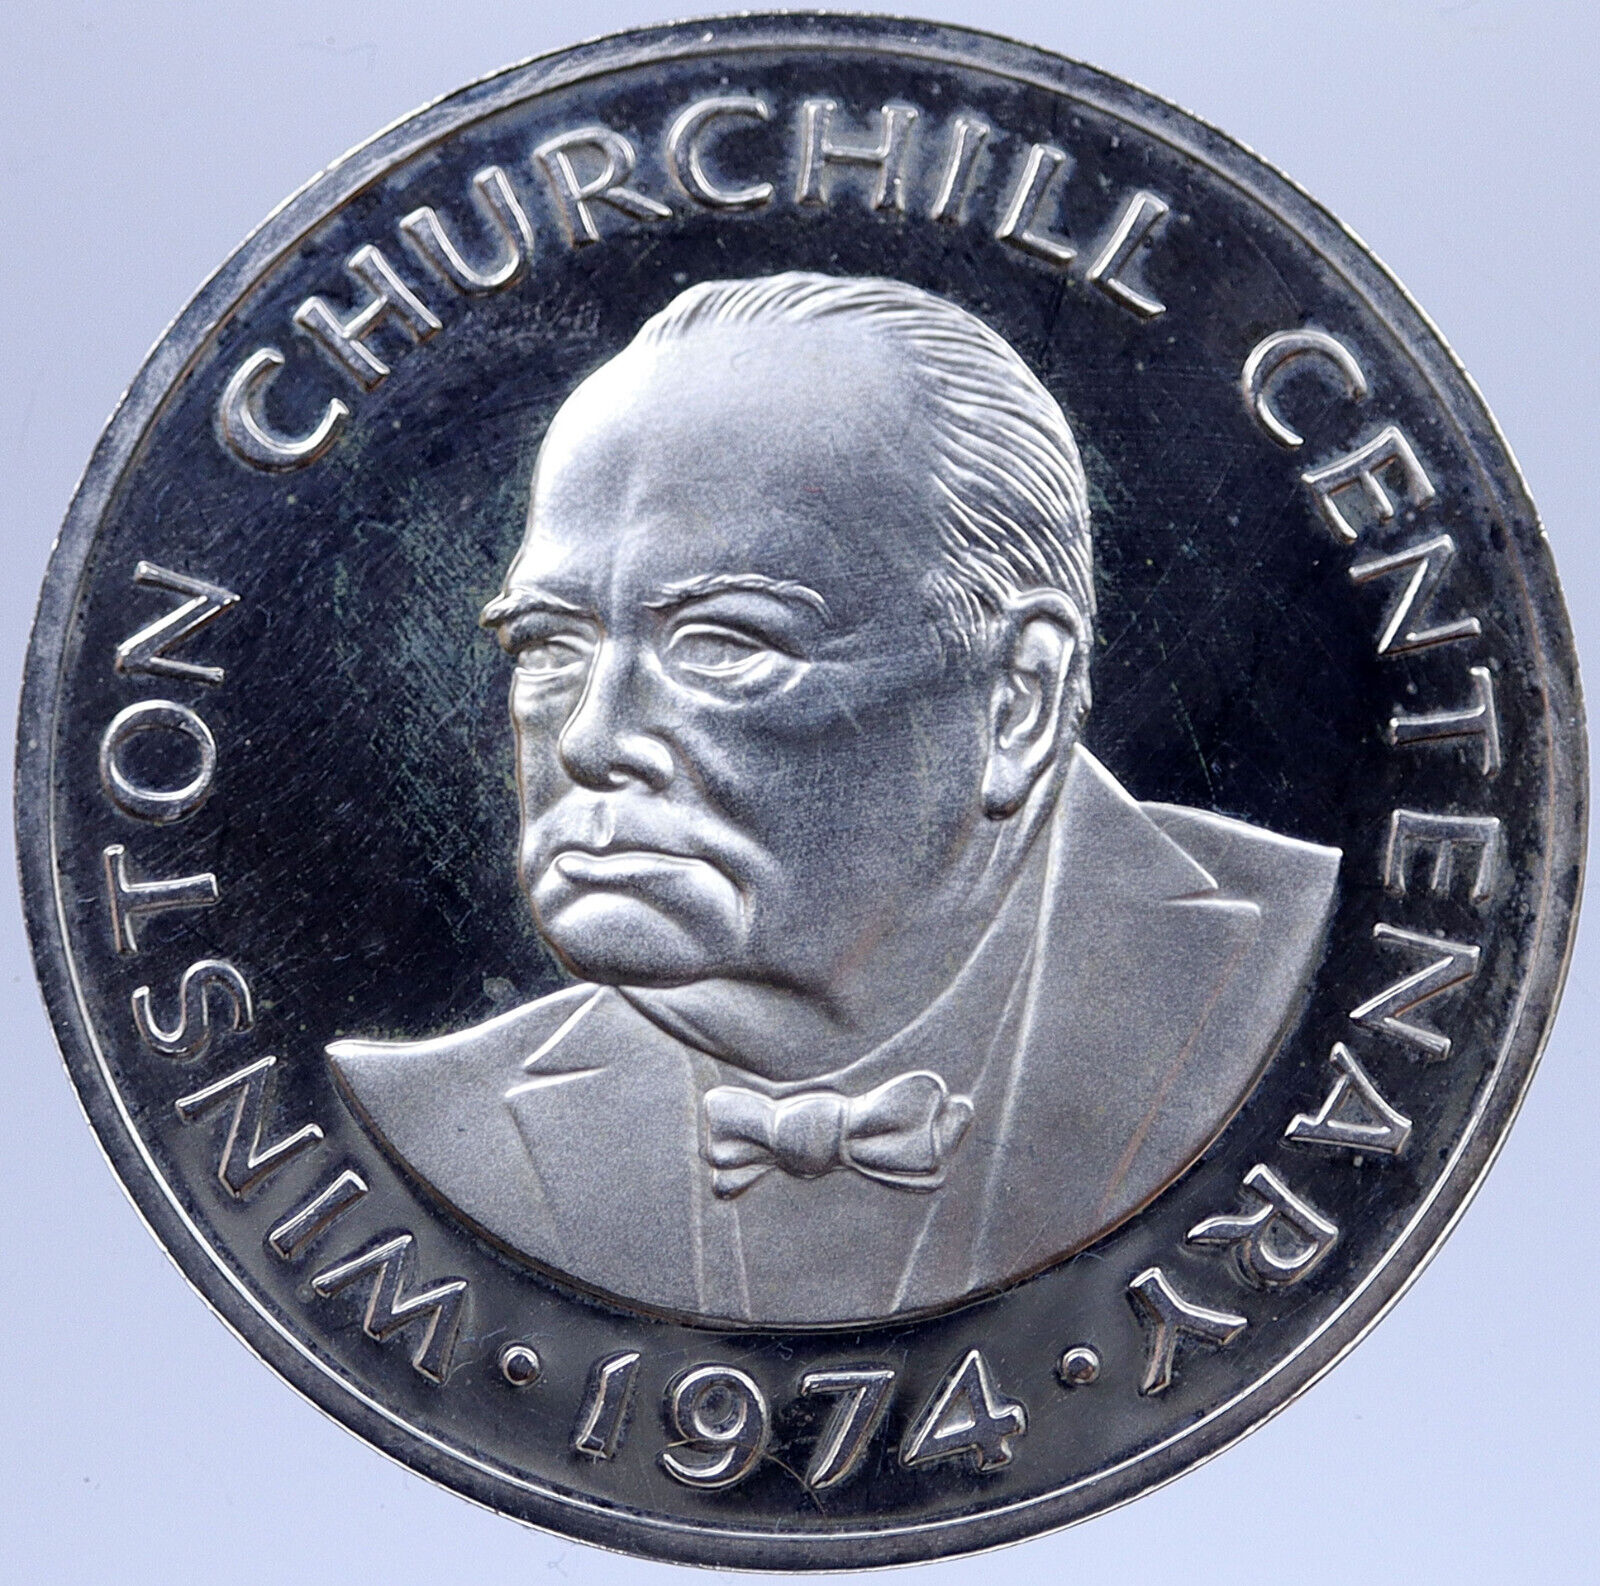 1974 TURKS & CAICOS UK WINSTON CHURCHILL Proof Silver 20 Crown Coin i118908